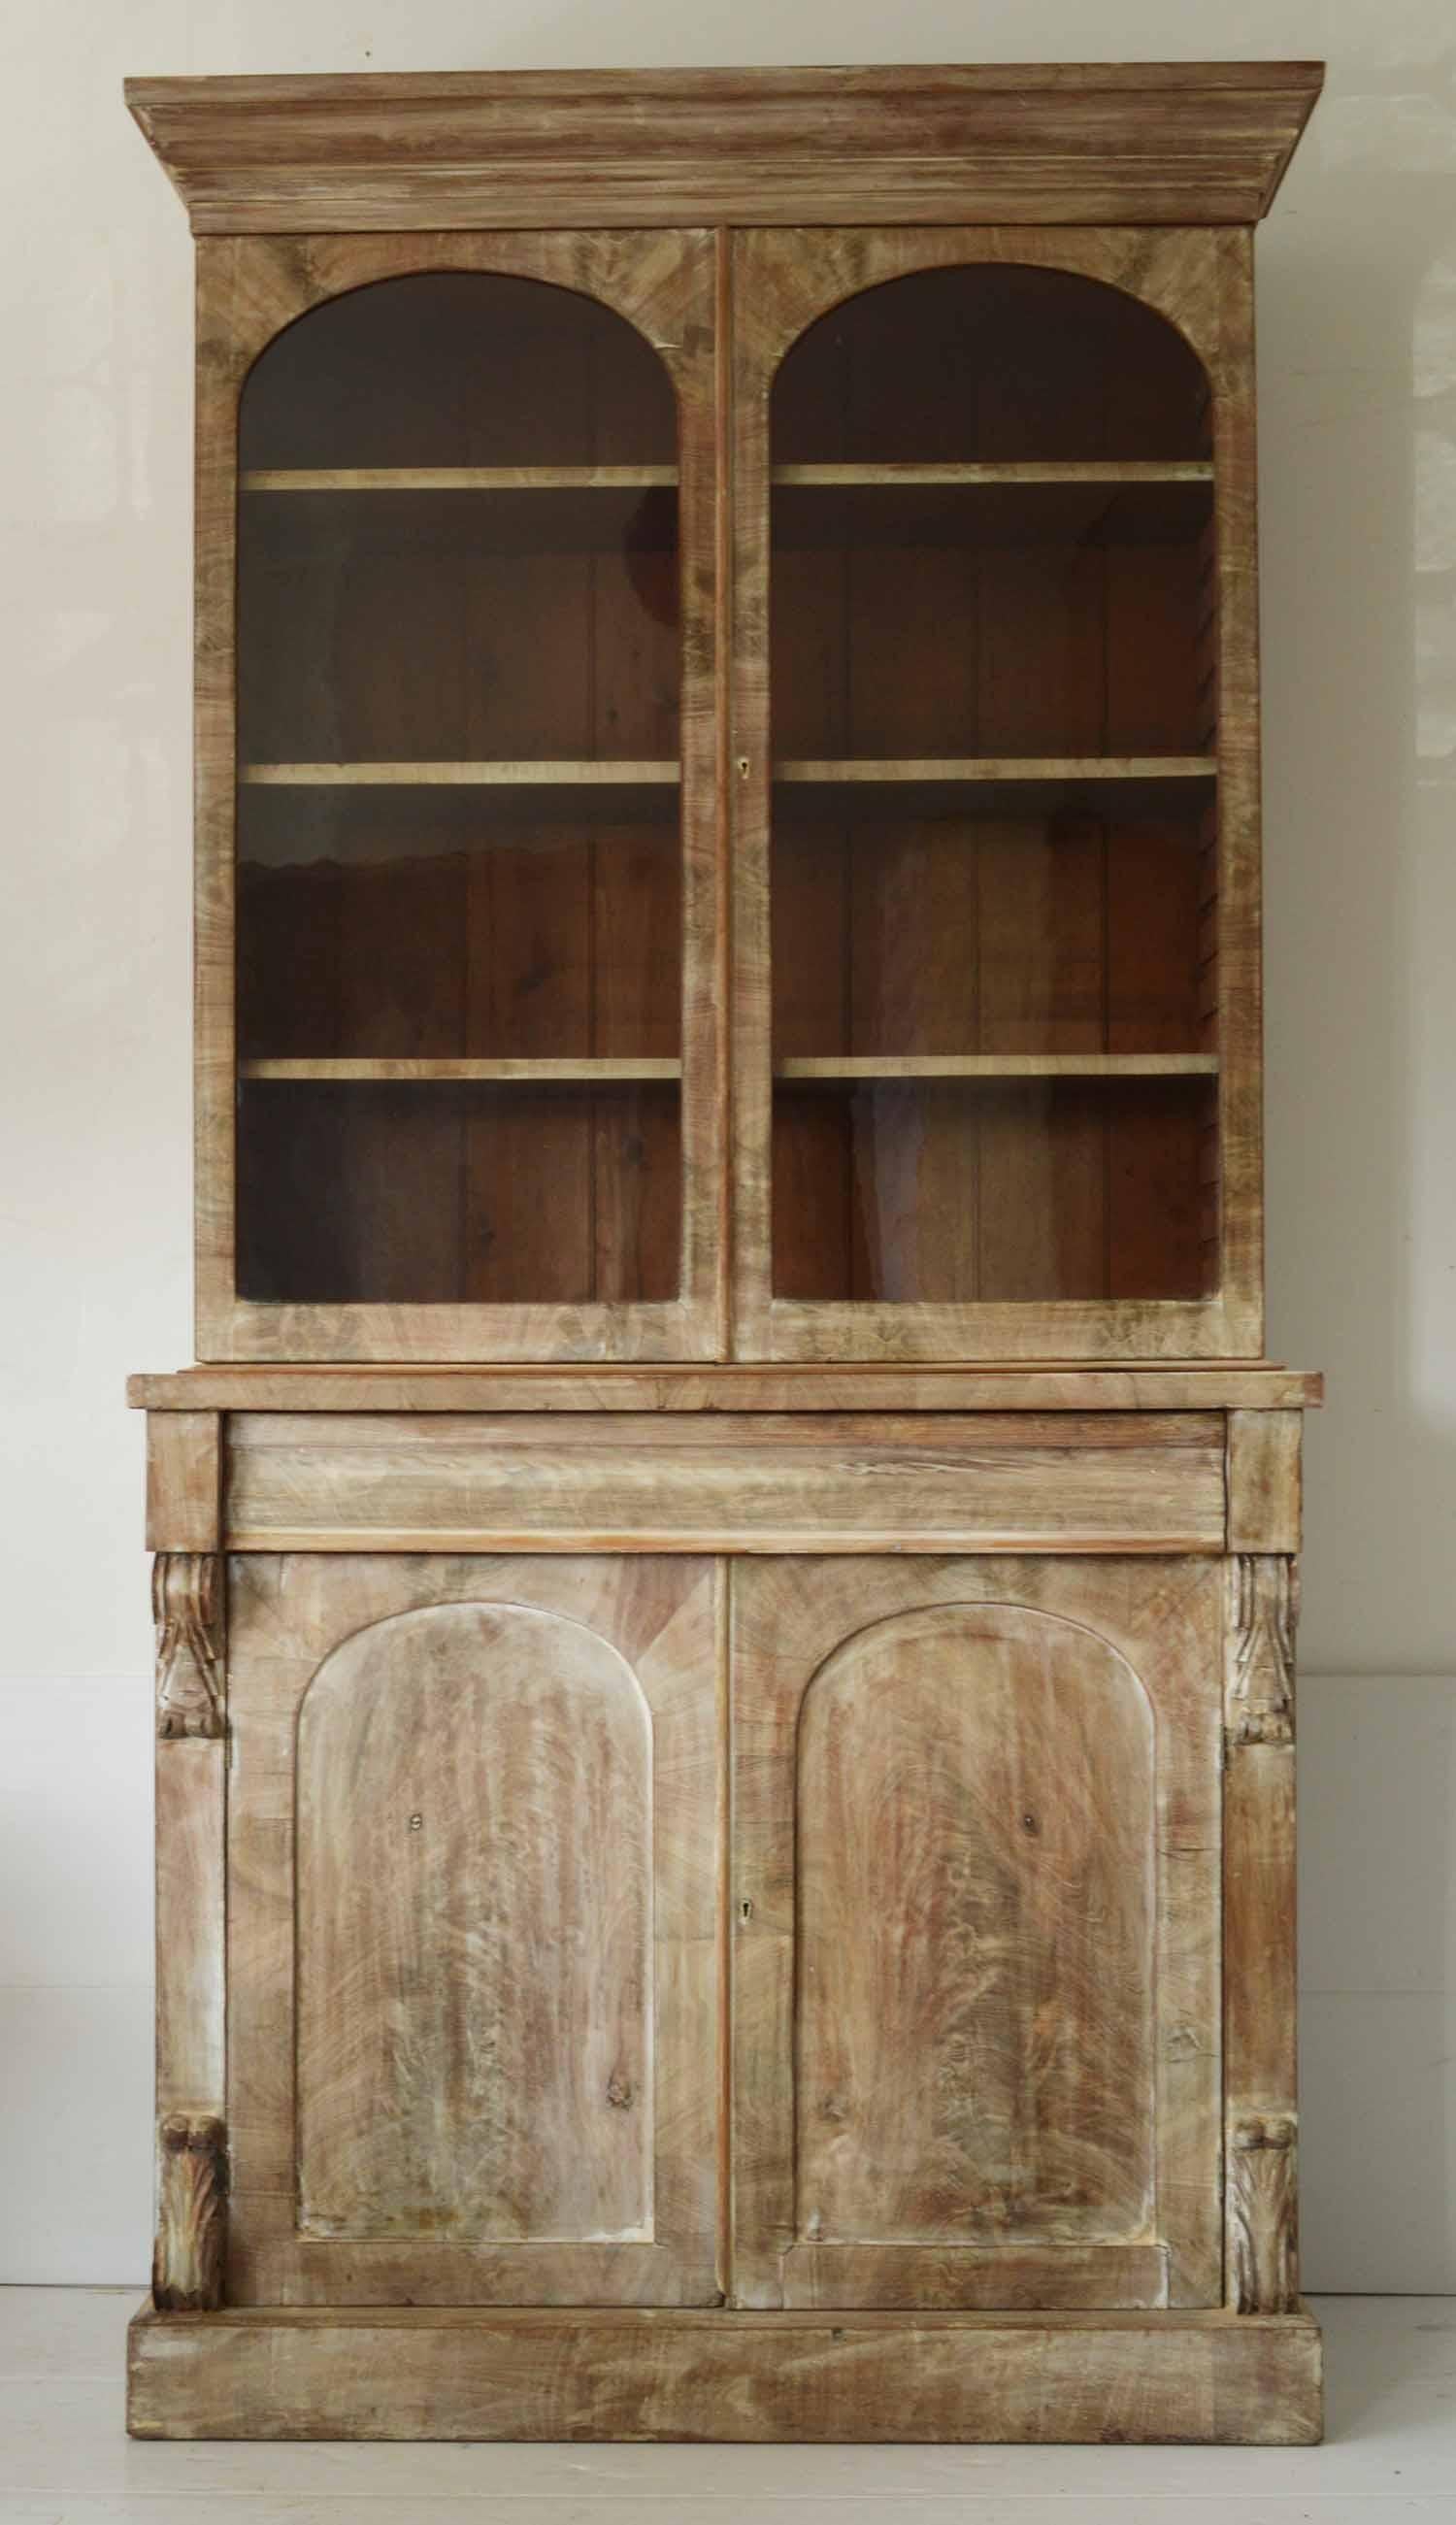 Fabulous bleached mahogany cabinet or vitrine

Wonderful figure to the mahogany. Recently bleached

I particularly like the rippley antique glass which you cannot appreciate from the images

4 Romanesque arched doors and a single